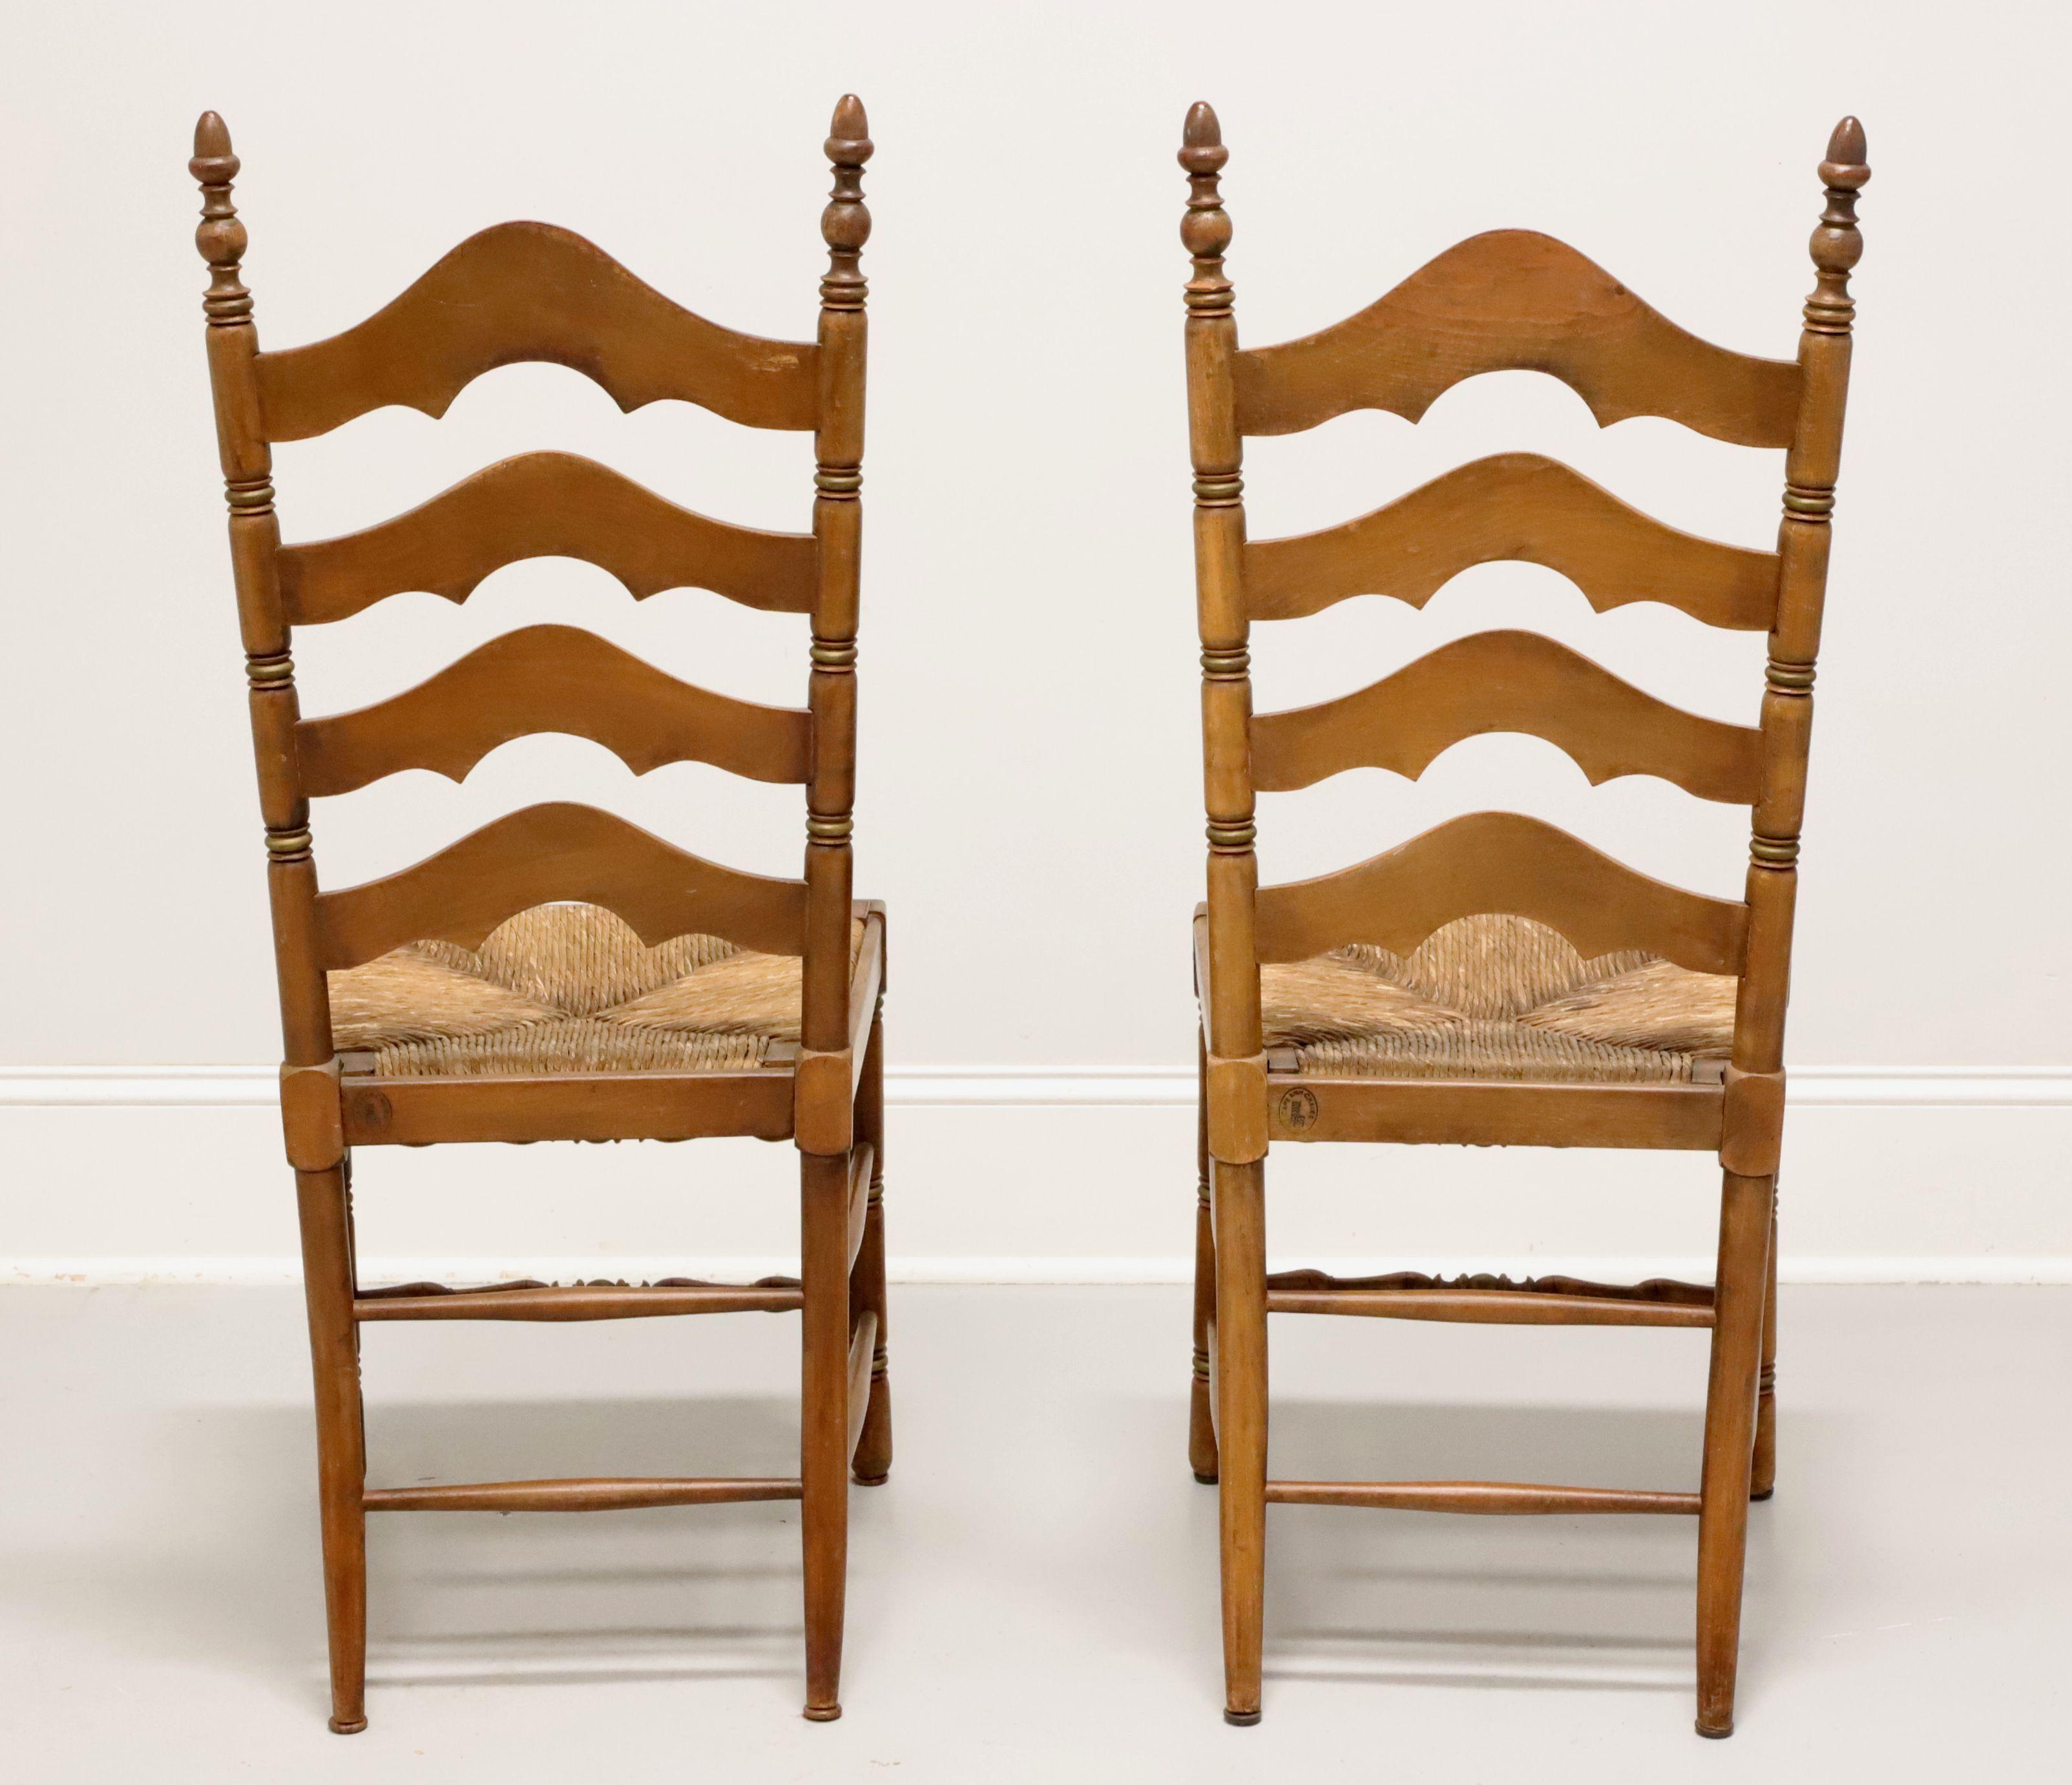 American CAPE ANN CHAIRS Maple Ladder Back Dining Side Chairs with Rush Seats - Pair B For Sale